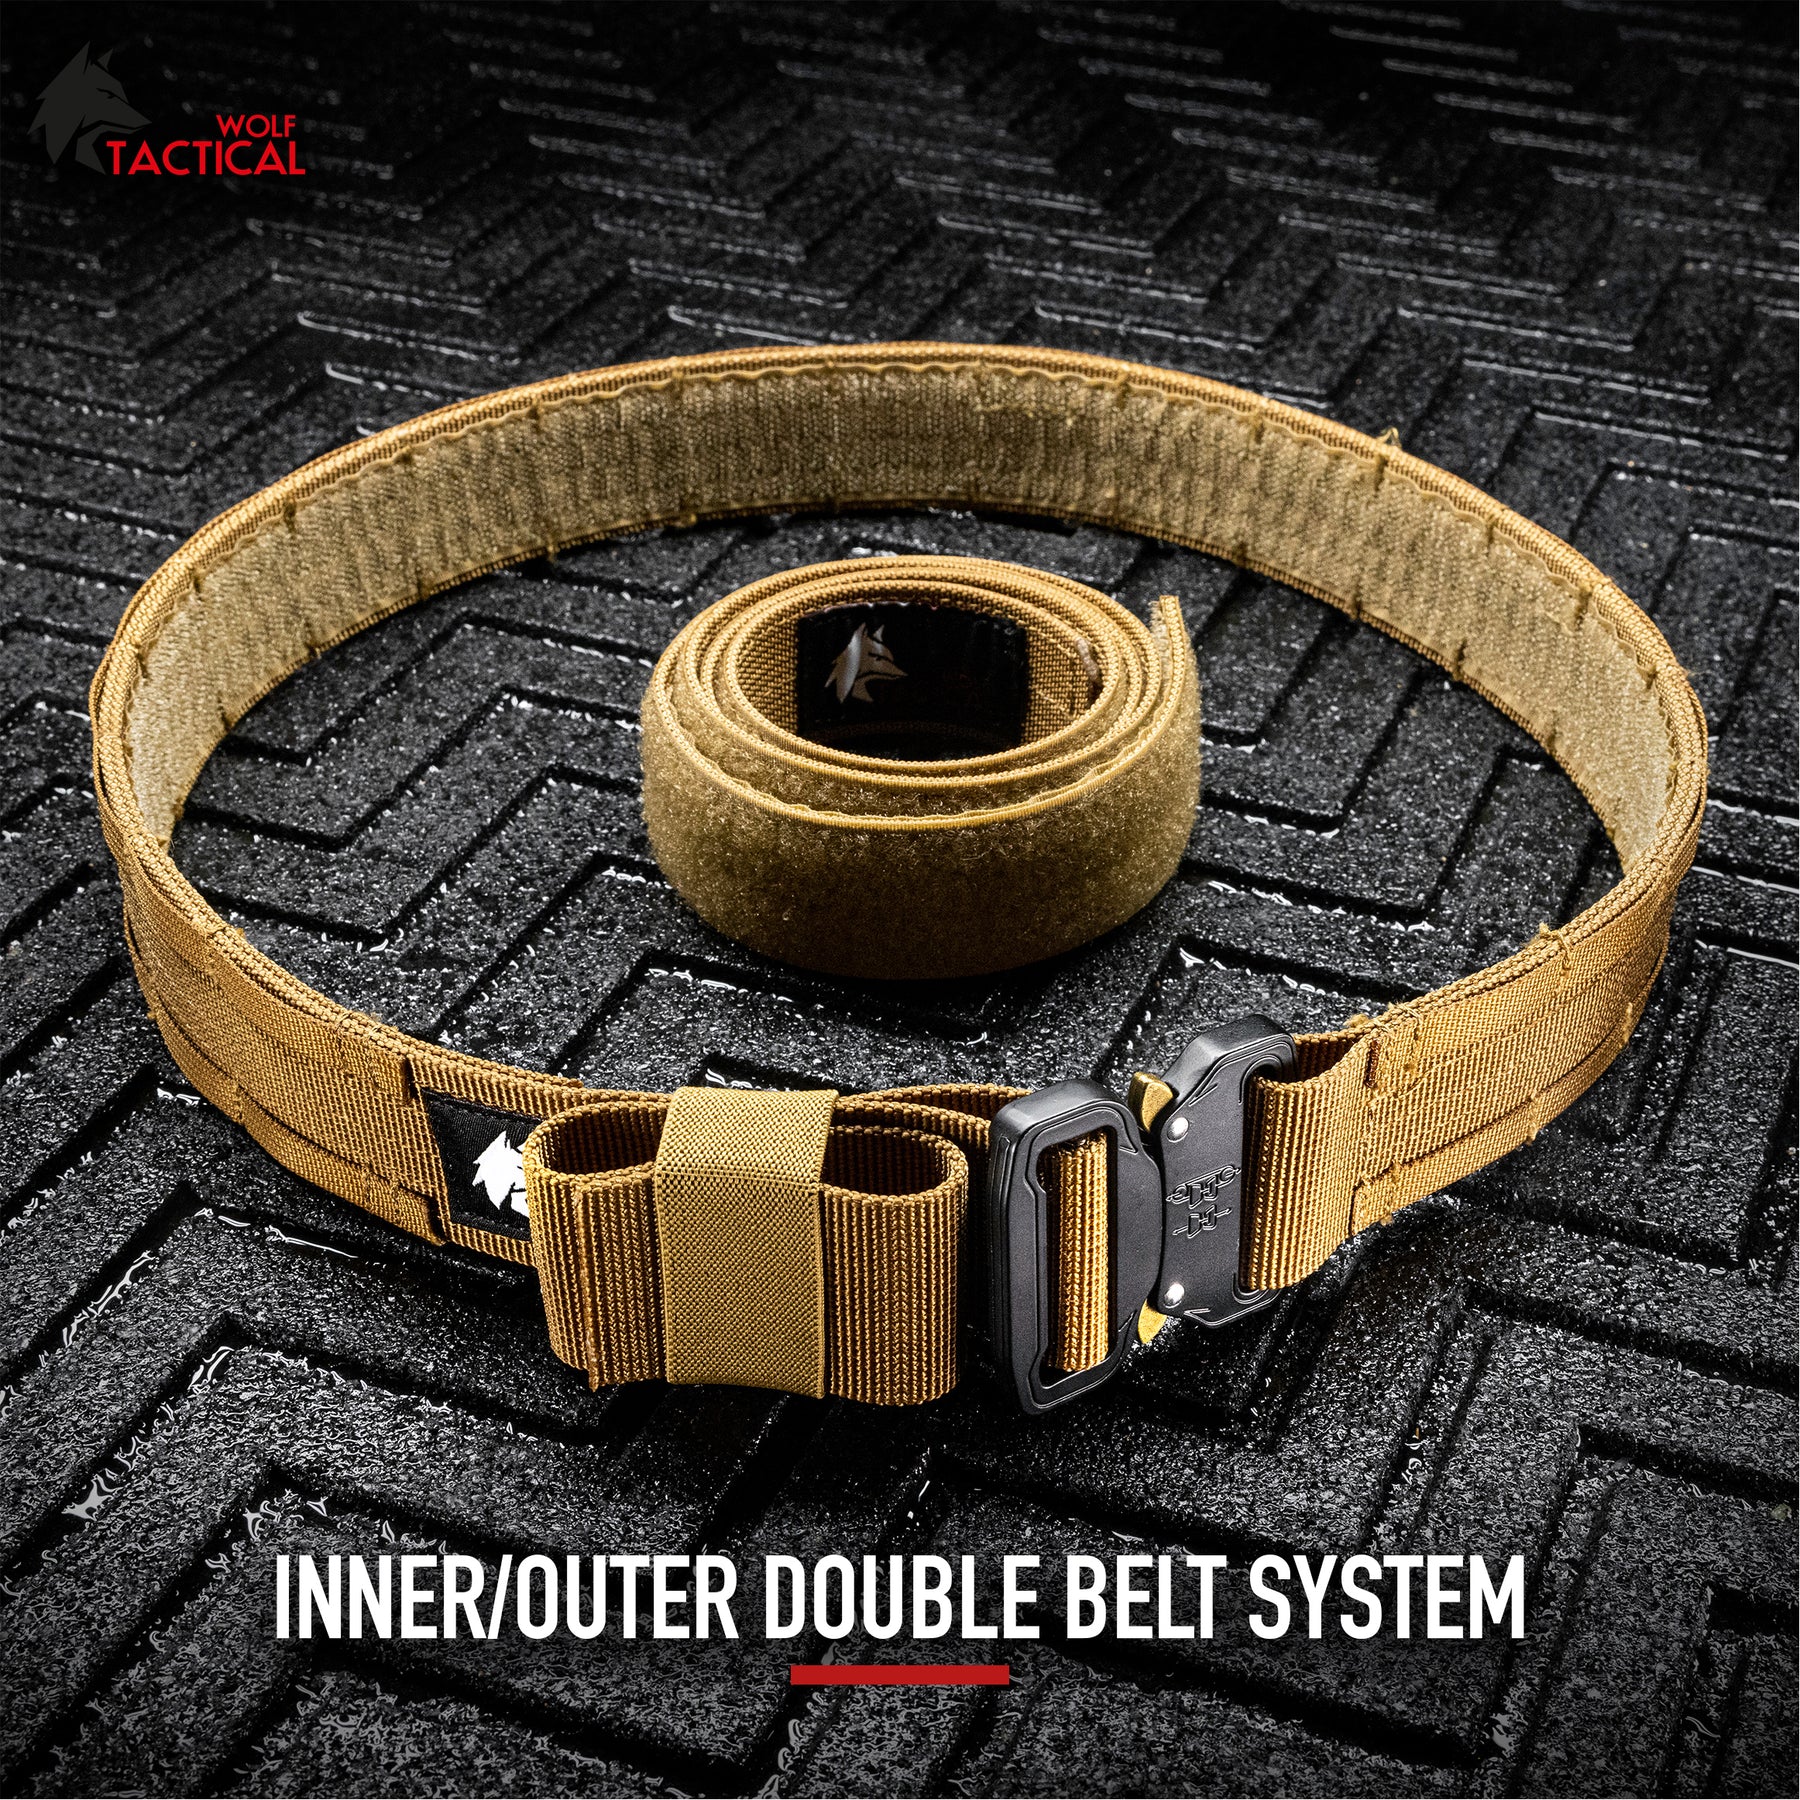 Police Tactical Belt Strong Load Bearing with Quick Release Buckle (1. –  dguniform